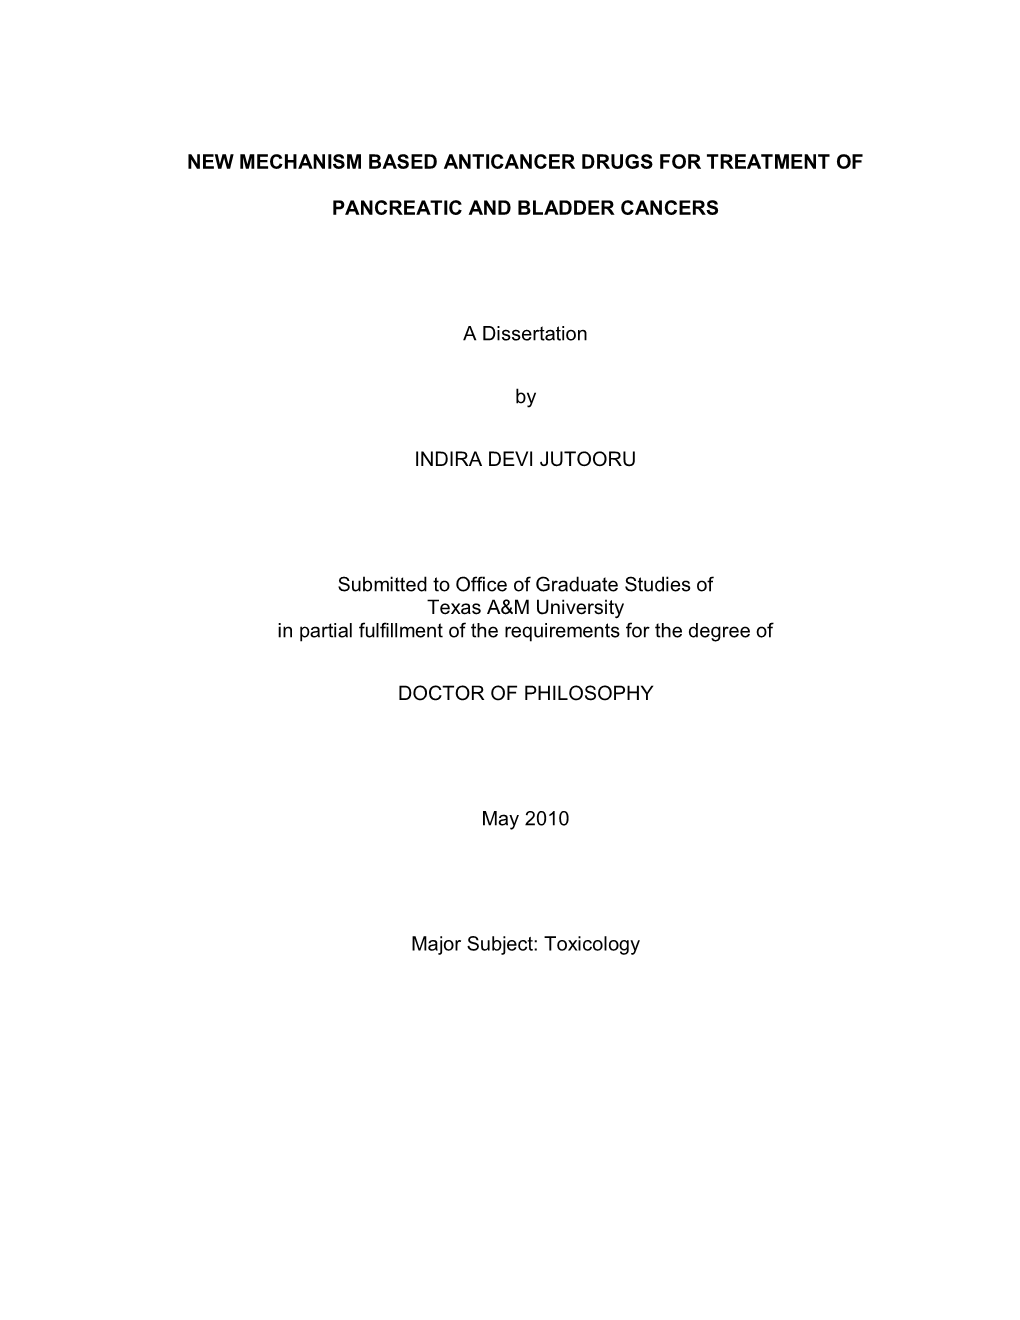 NEW MECHANISM BASED ANTICANCER DRUGS for TREATMENT of PANCREATIC and BLADDER CANCERS a Dissertation by INDIRA DEVI JUTOORU Subm